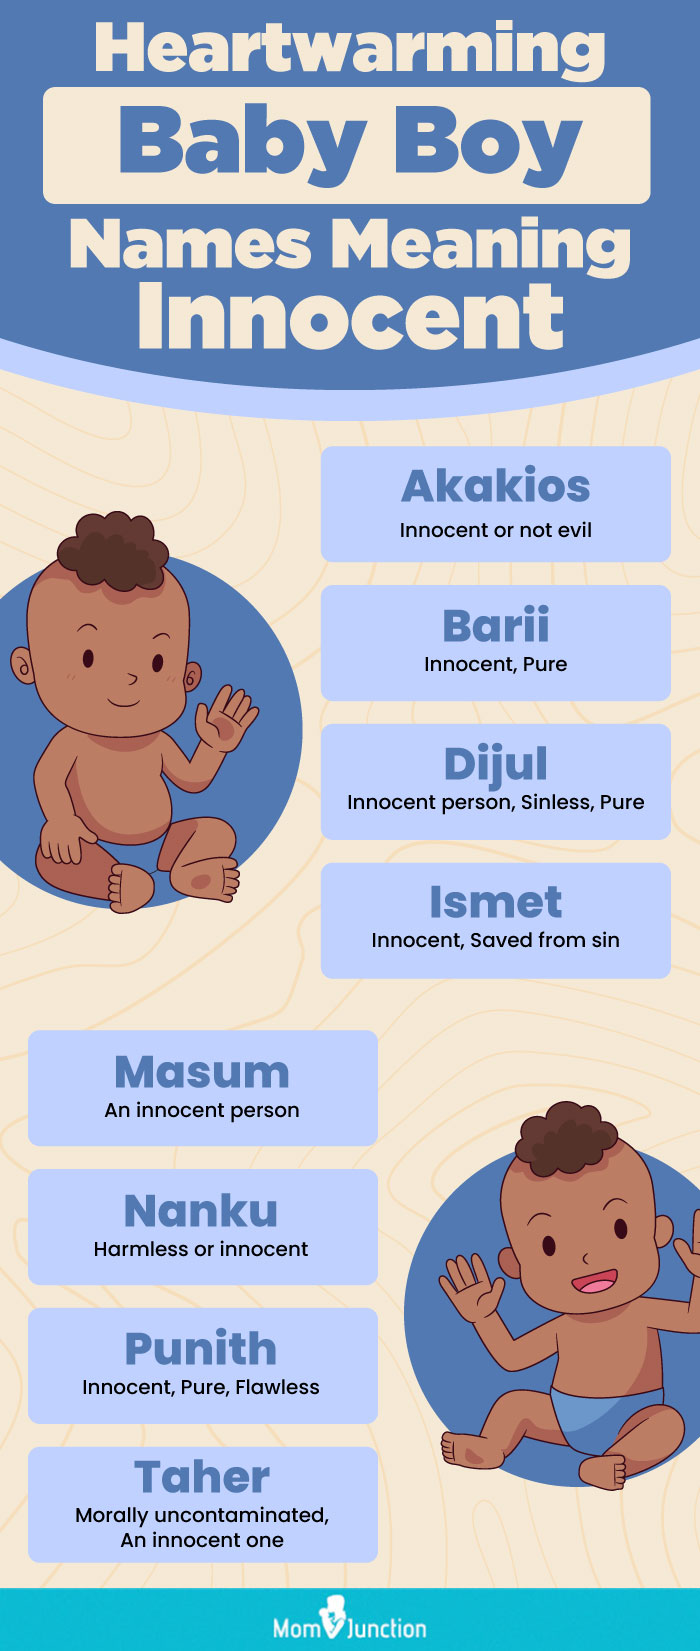 heartwarming baby boy names meaning innocent (infographic)